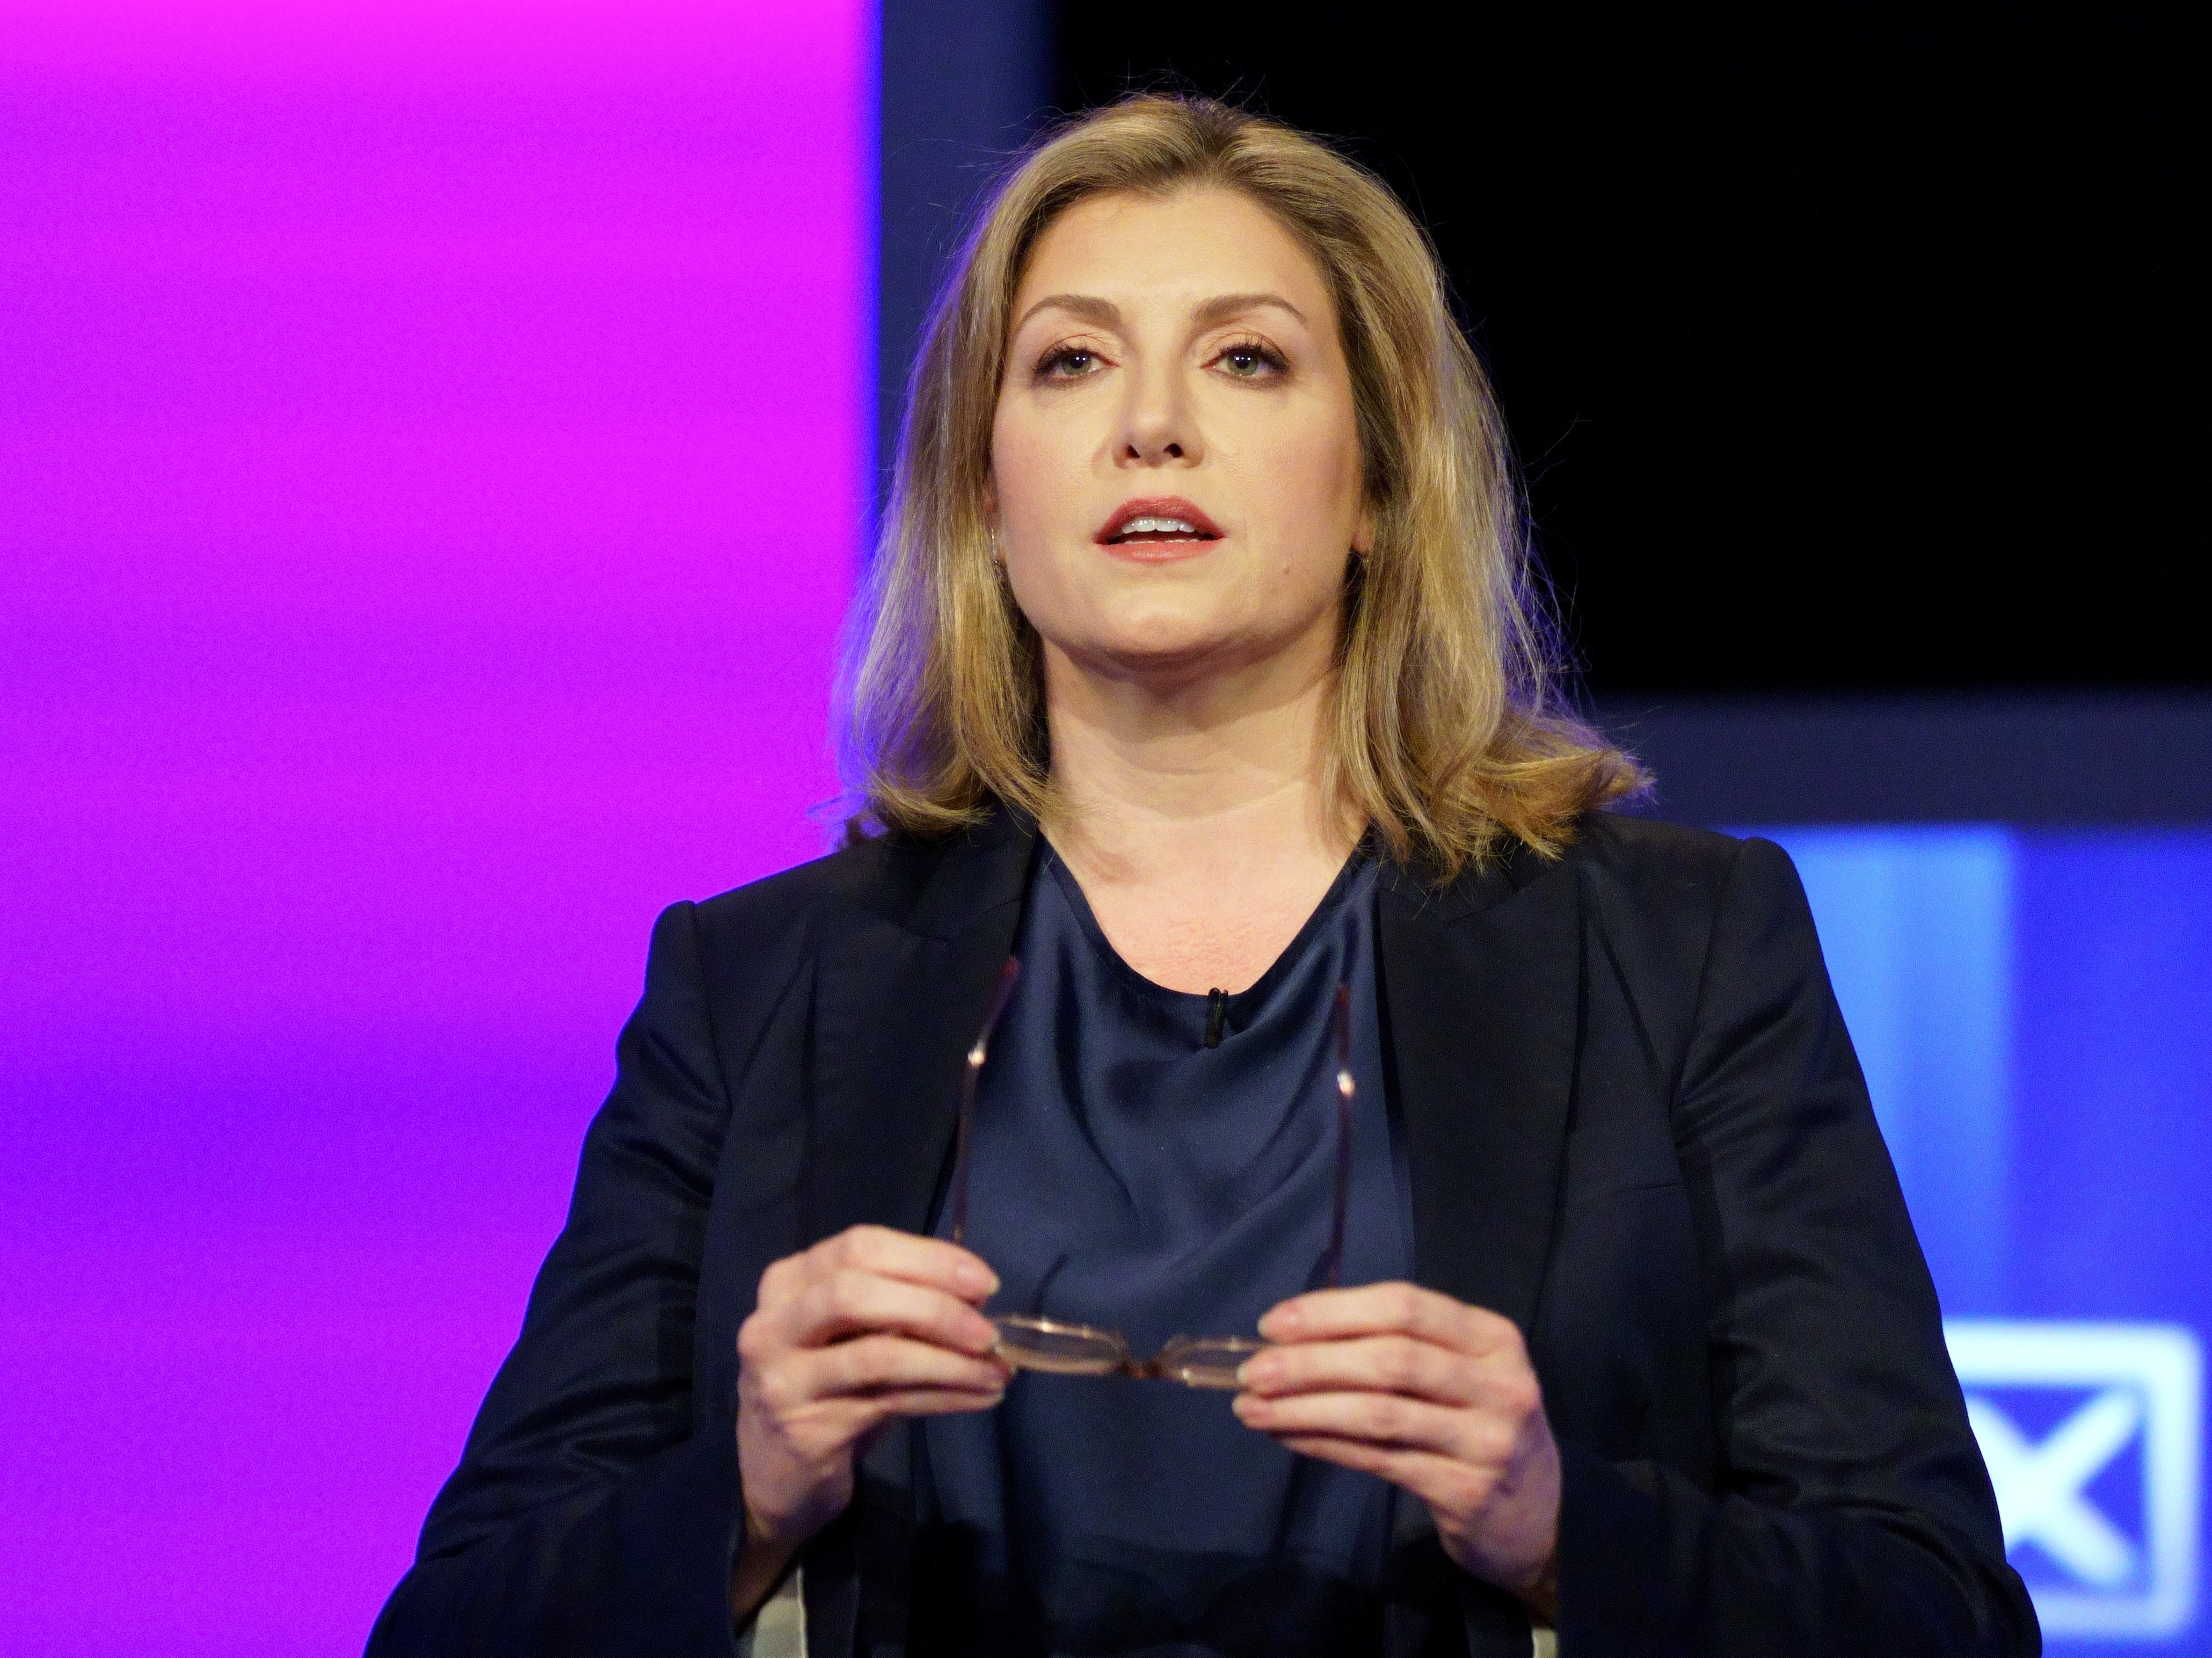 Supporters of Penny Mordaunt claim leaked documents derailed her campaign to become next PM